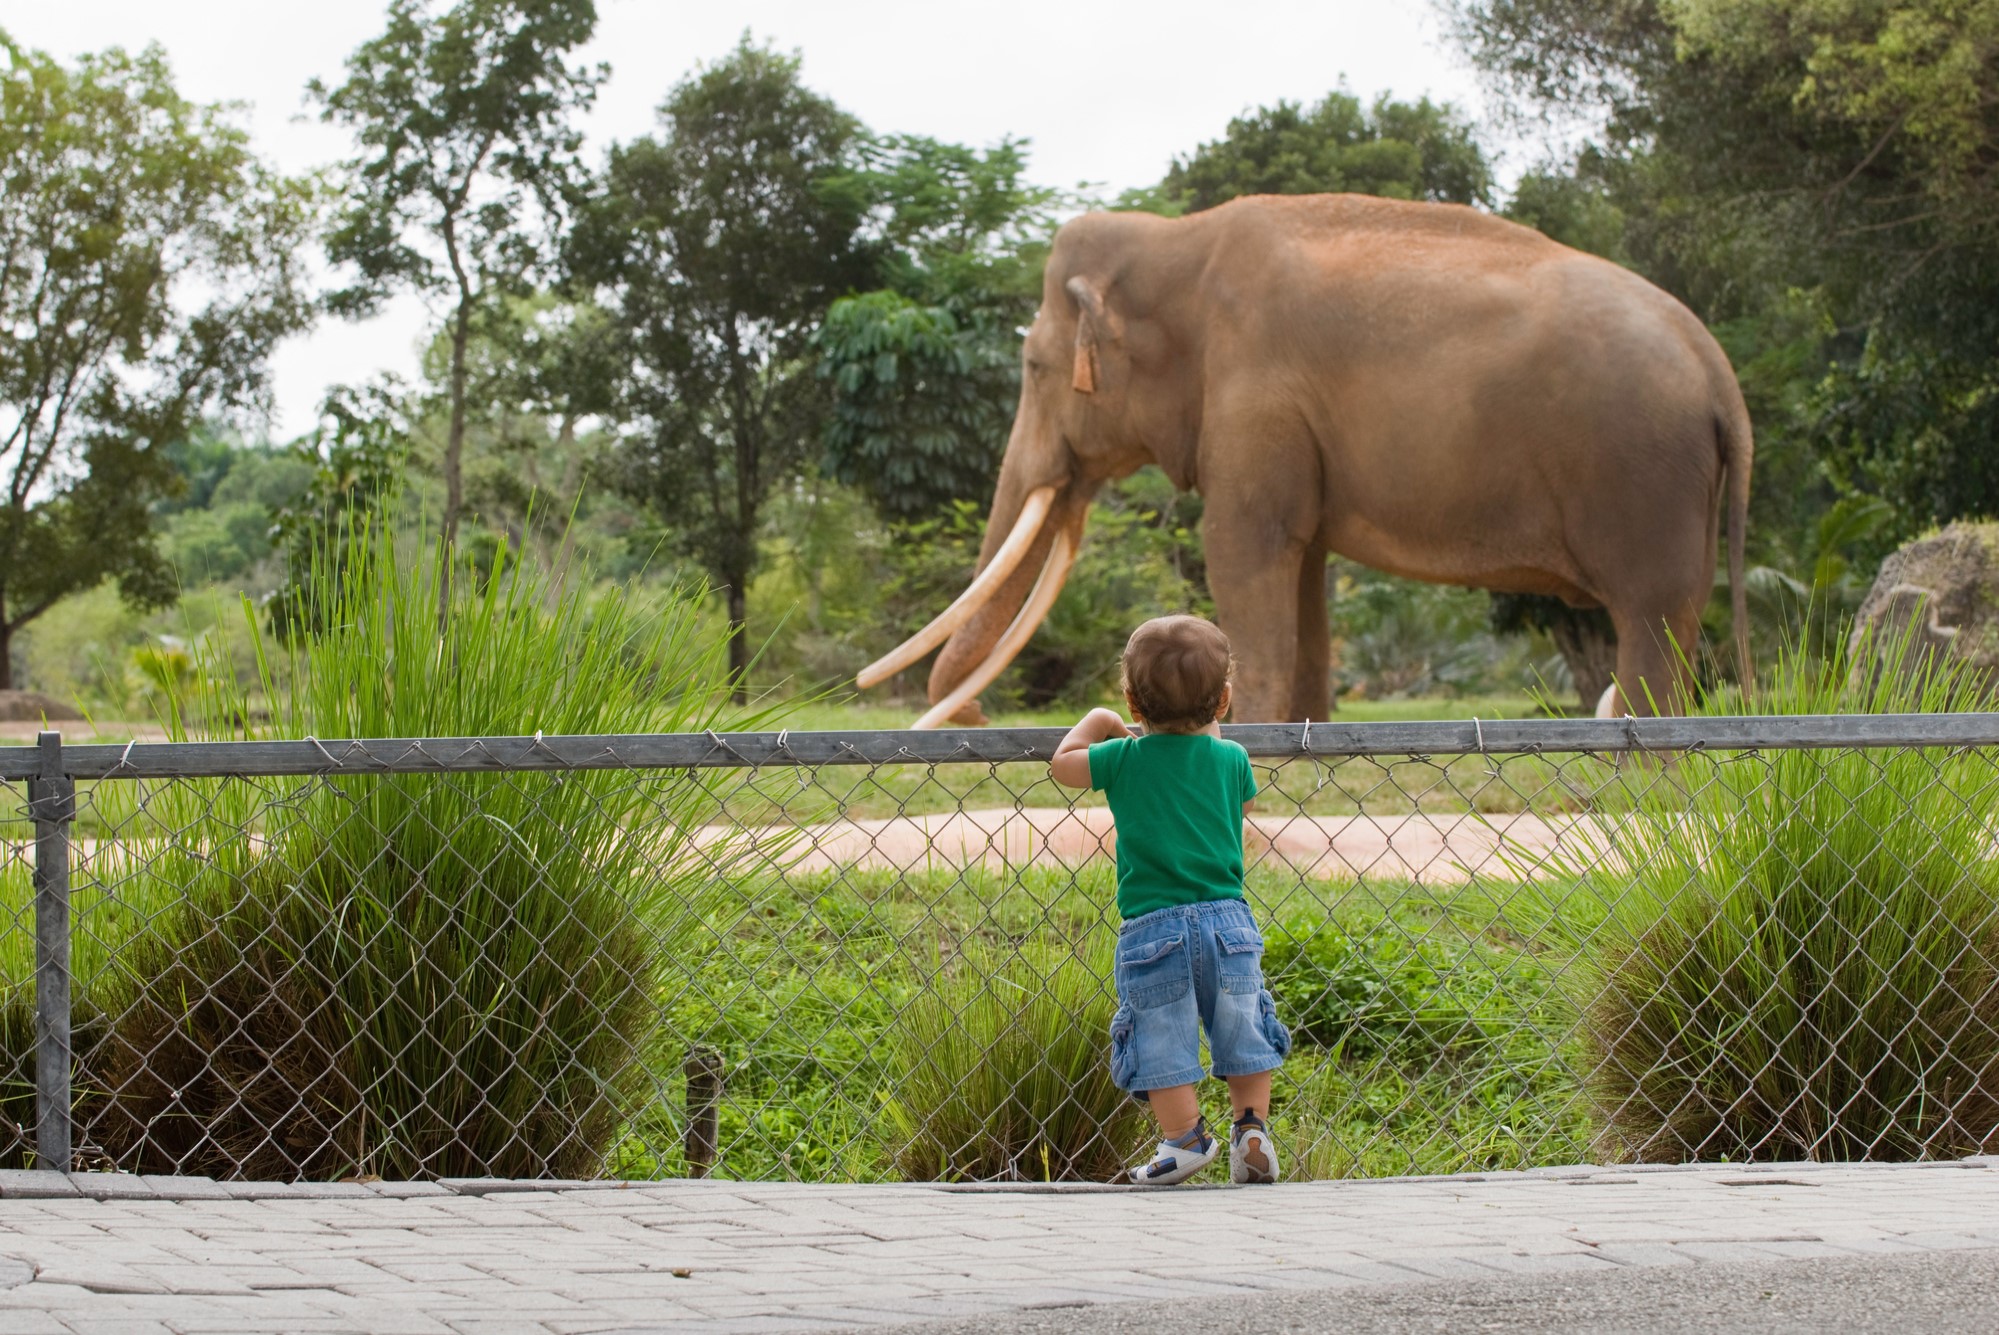 photograph of young child watching elephant at zoo